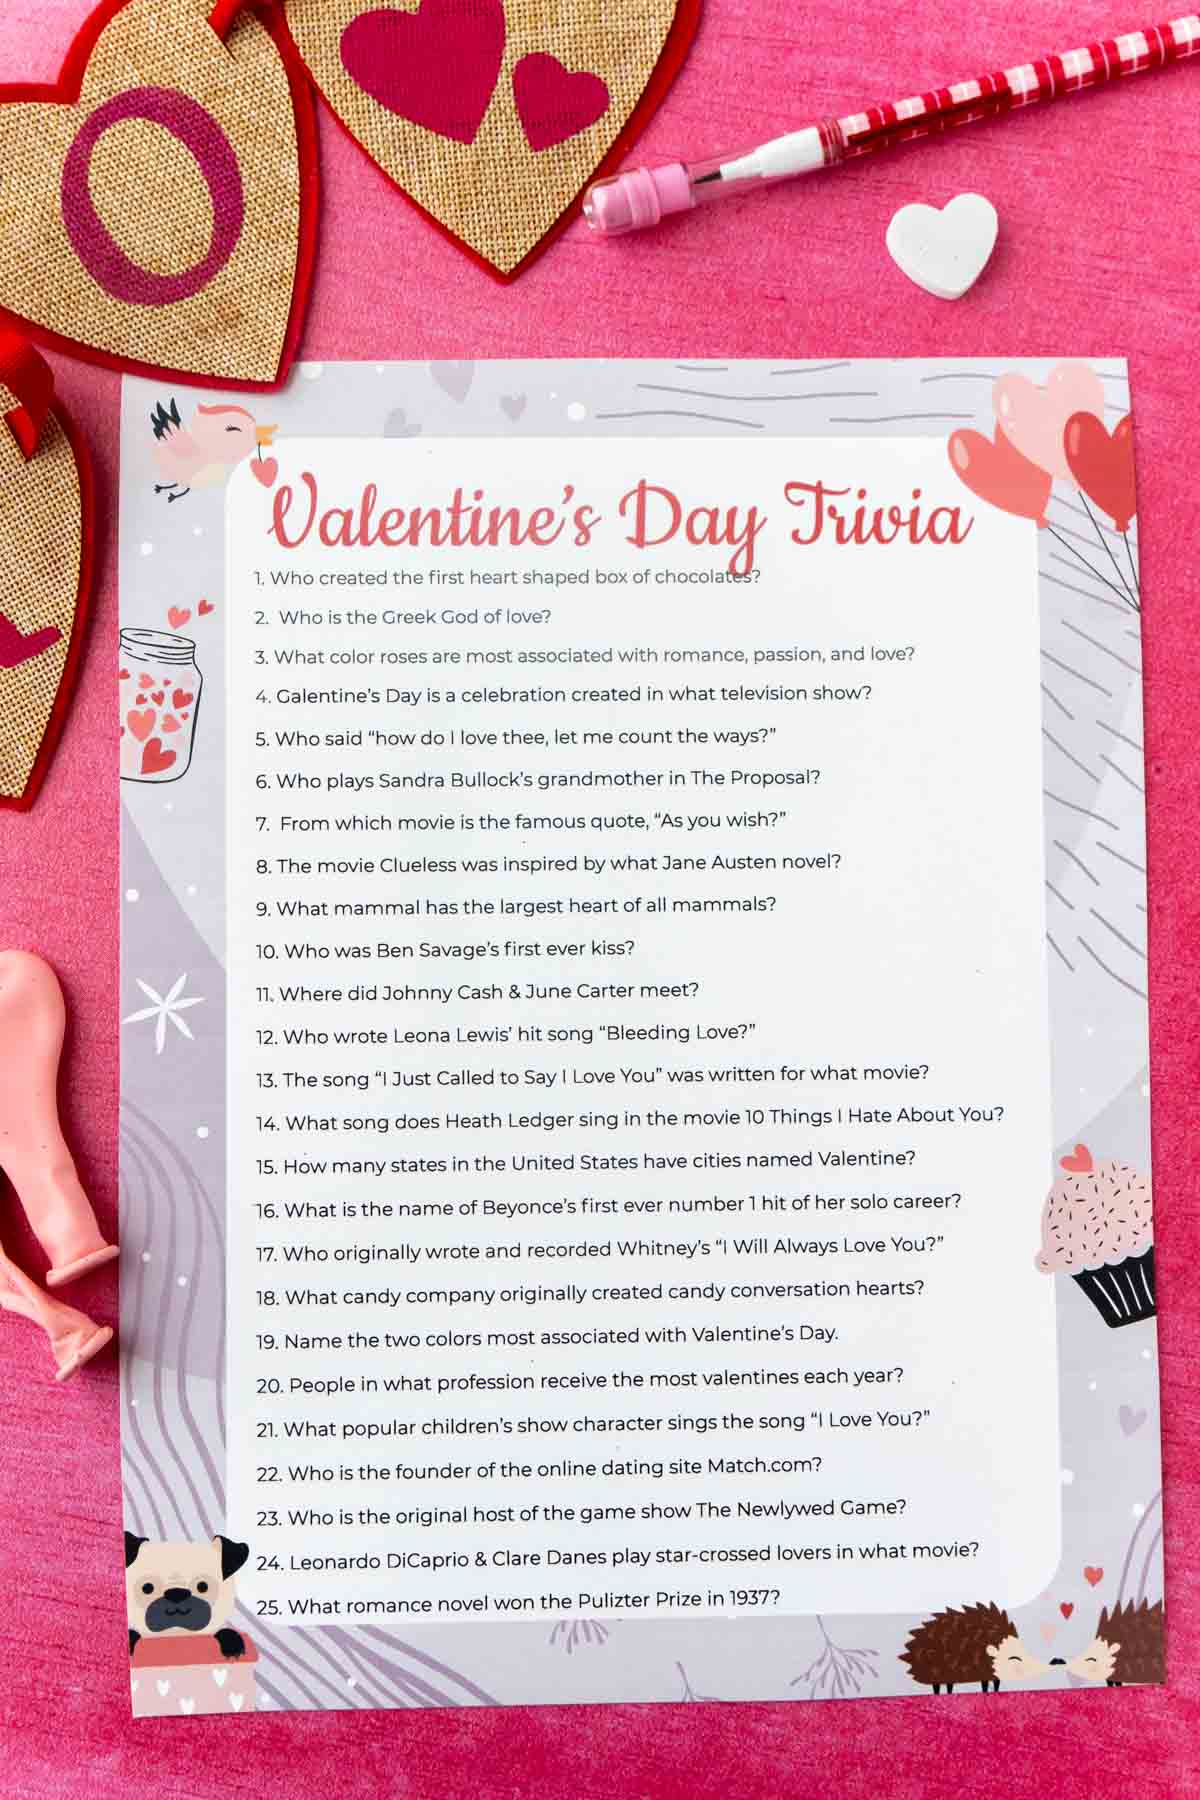 Valentines Day Trivia Questions  Free Printable   - 1